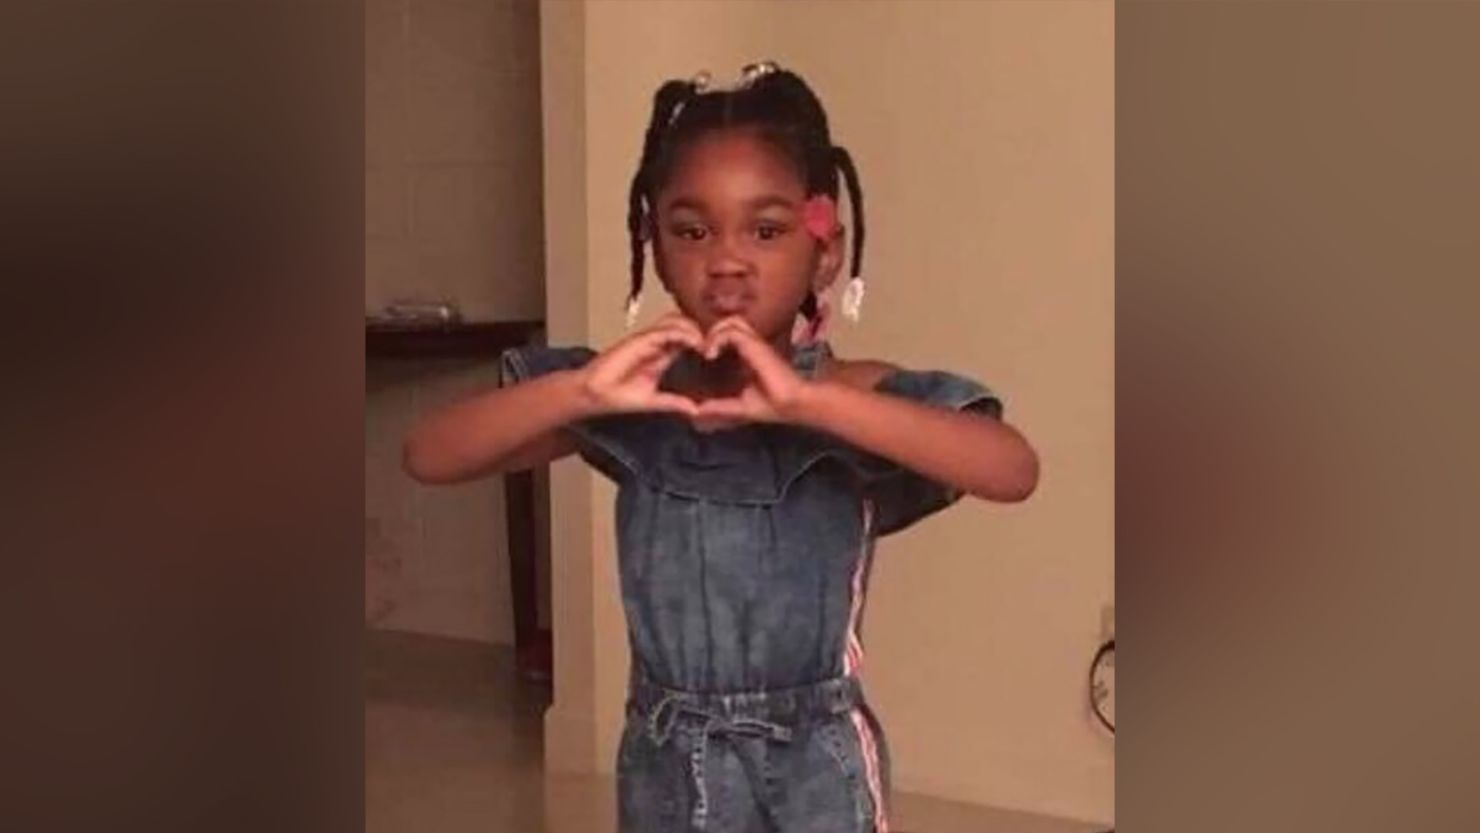 Nevaeh Lashy Adams has been missing since August 5, 2019.